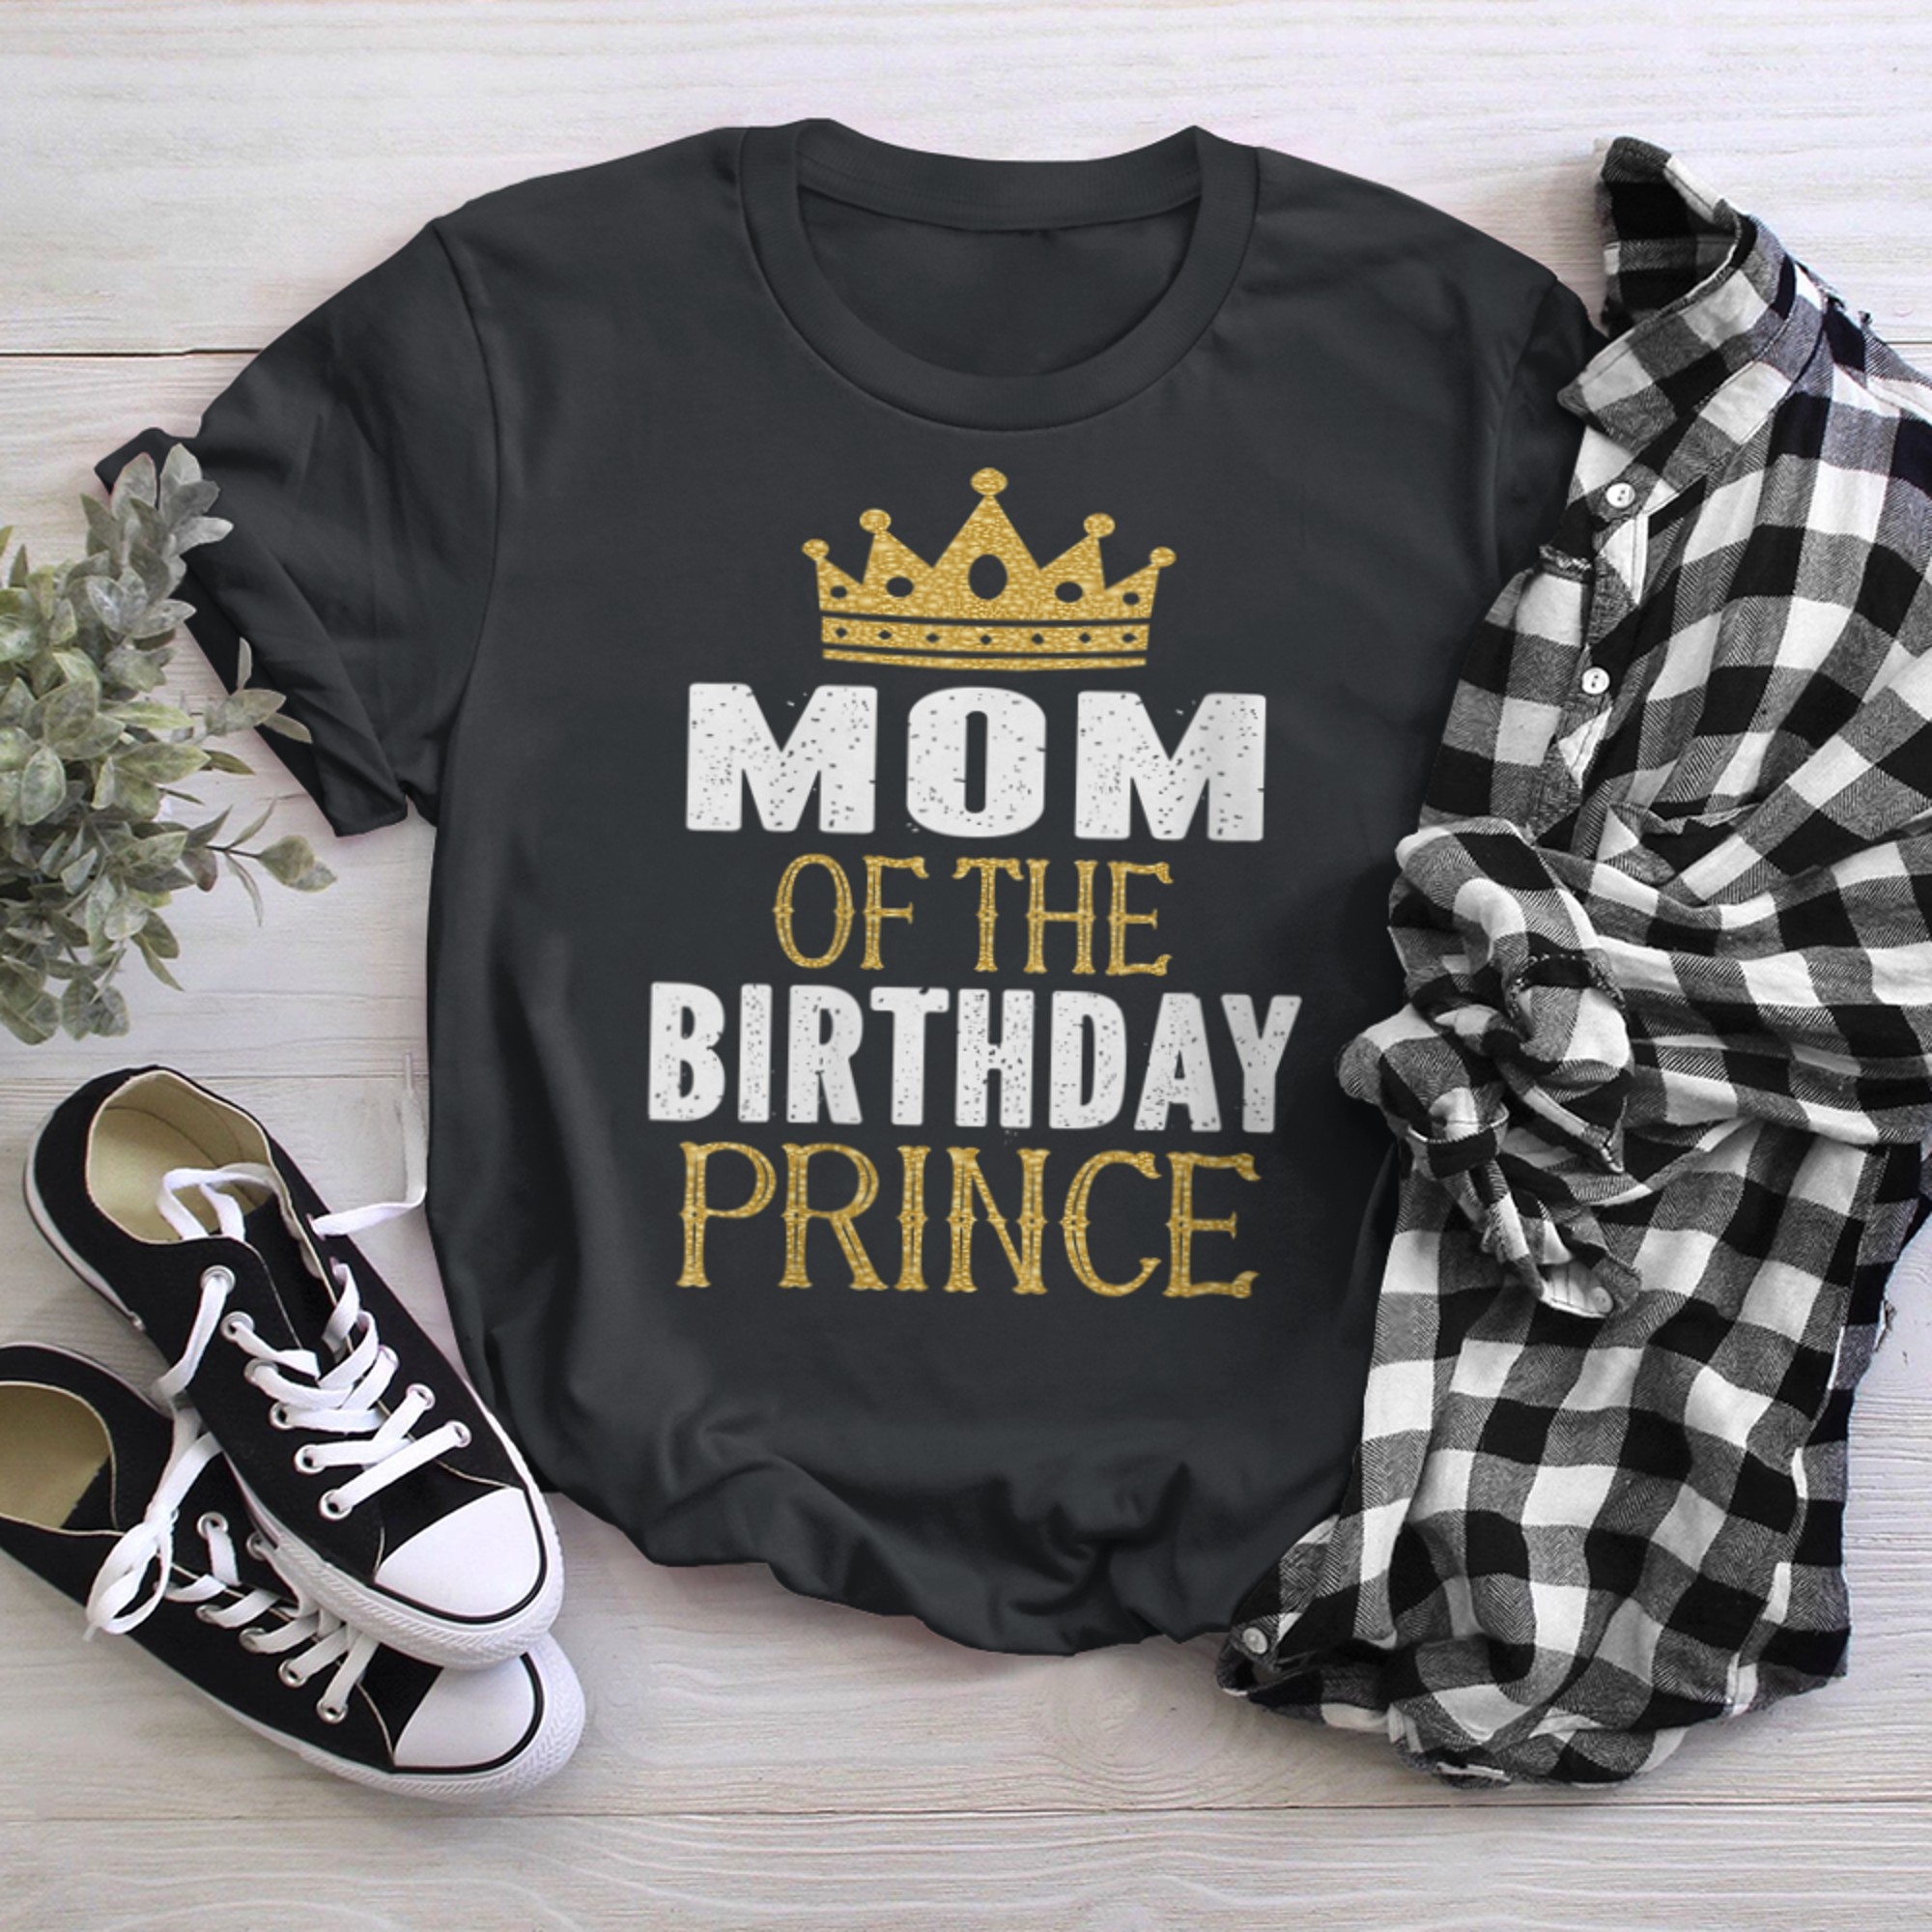 Mom Of The Birthday Prince Bday Party For Him t-shirt black